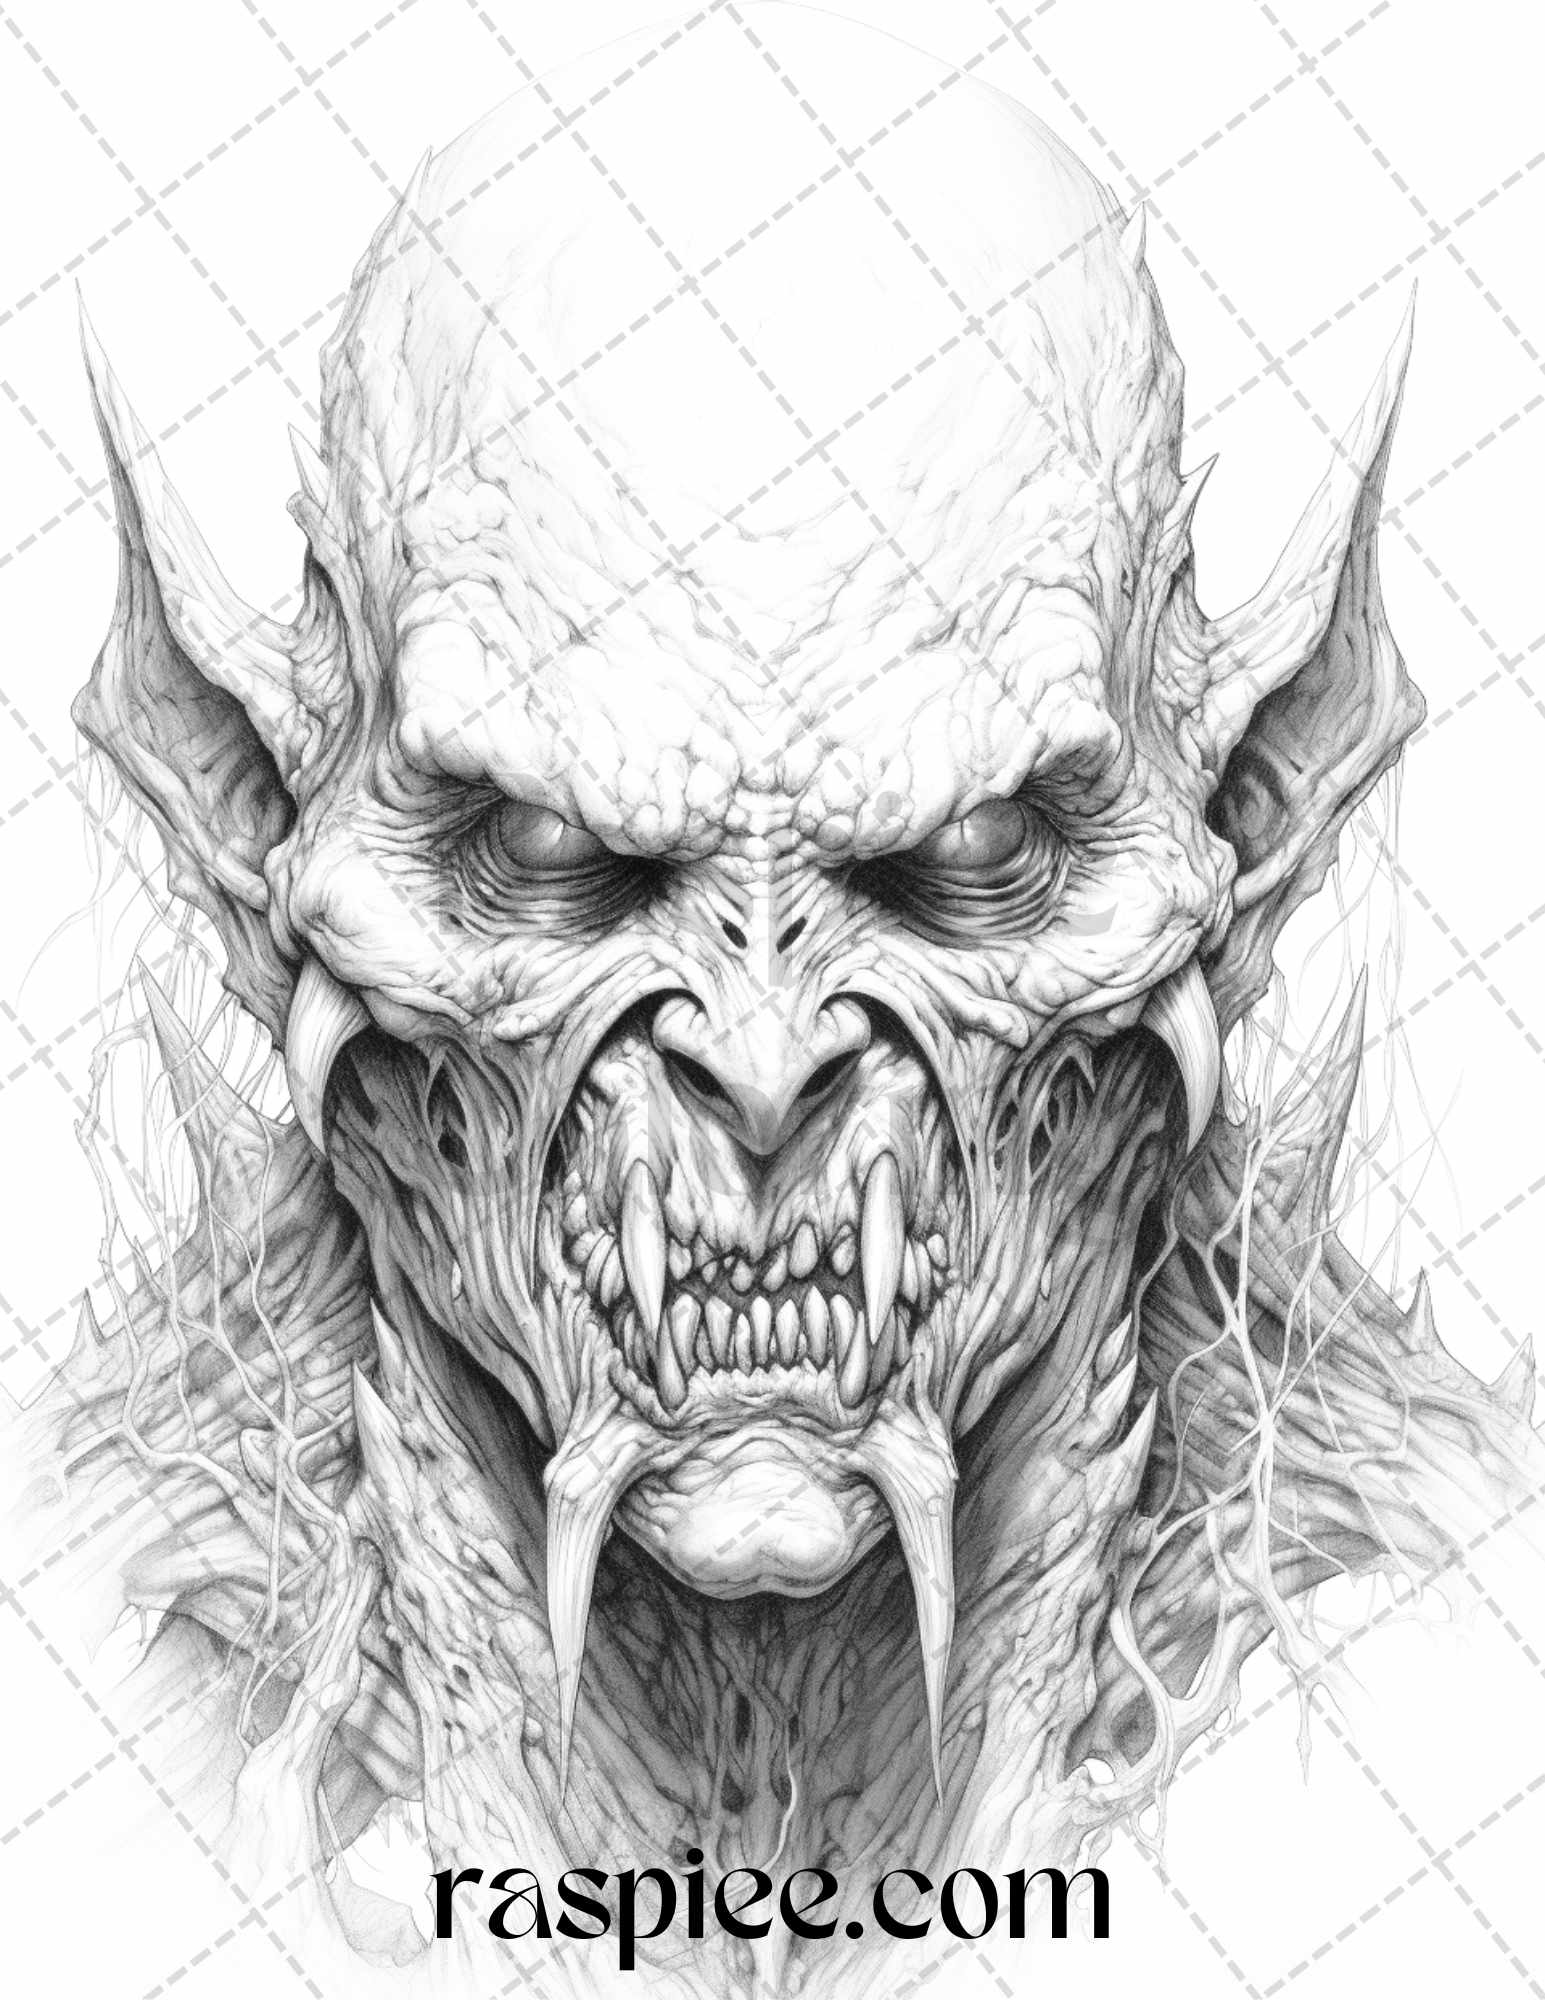 Fantasy demons grayscale coloring pages for adults printable pdf f â coloring